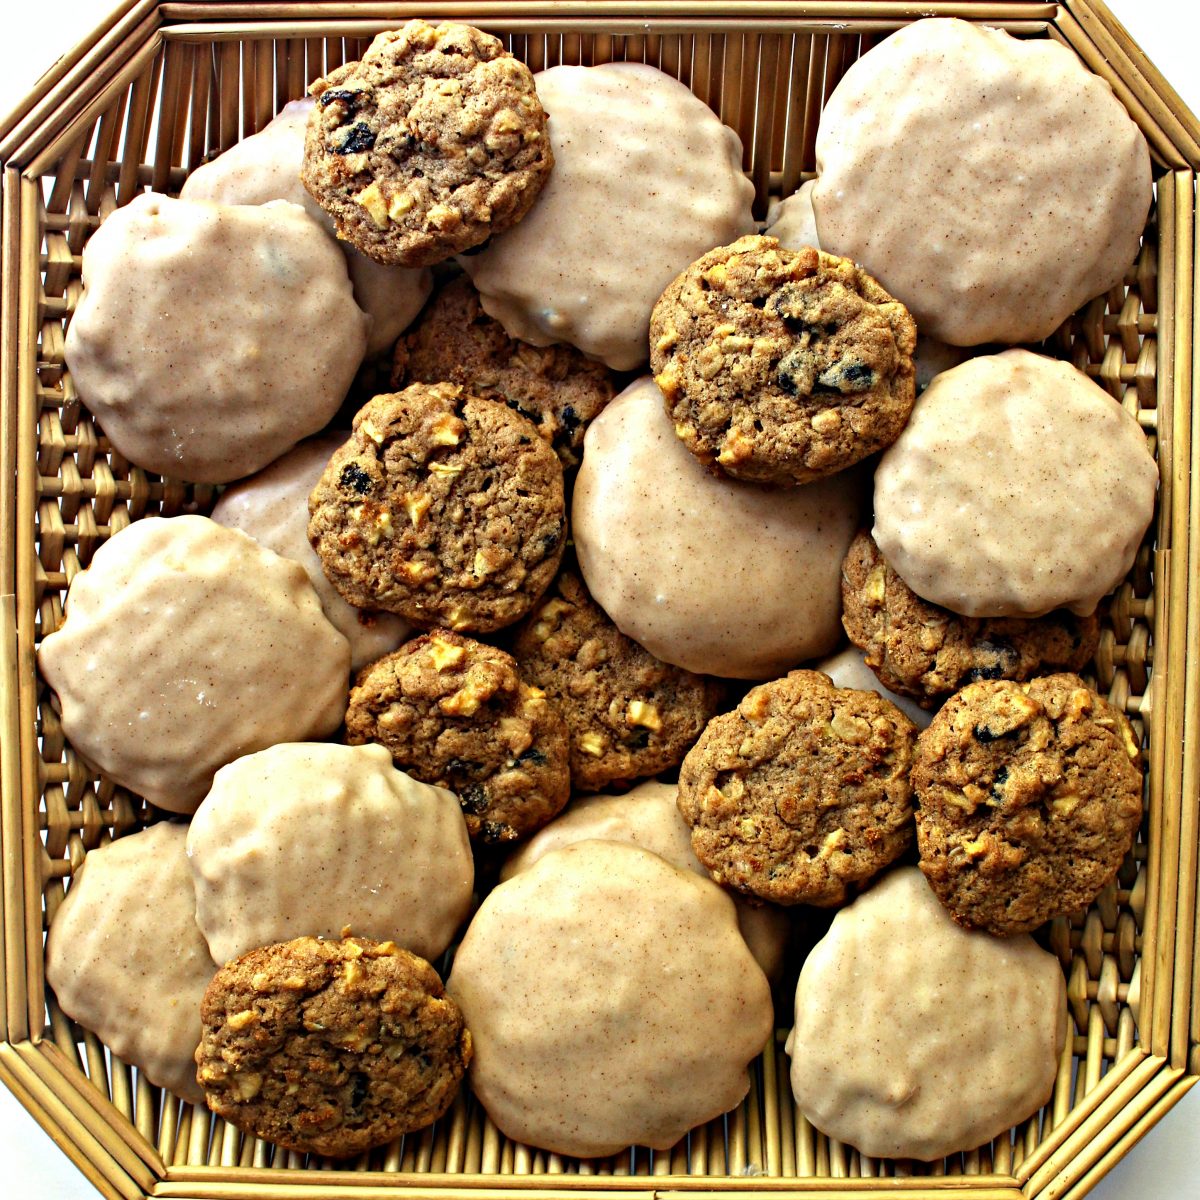 Apple Raisin Oatmeal Cookies, iced and plain, in a shallow, square basket.